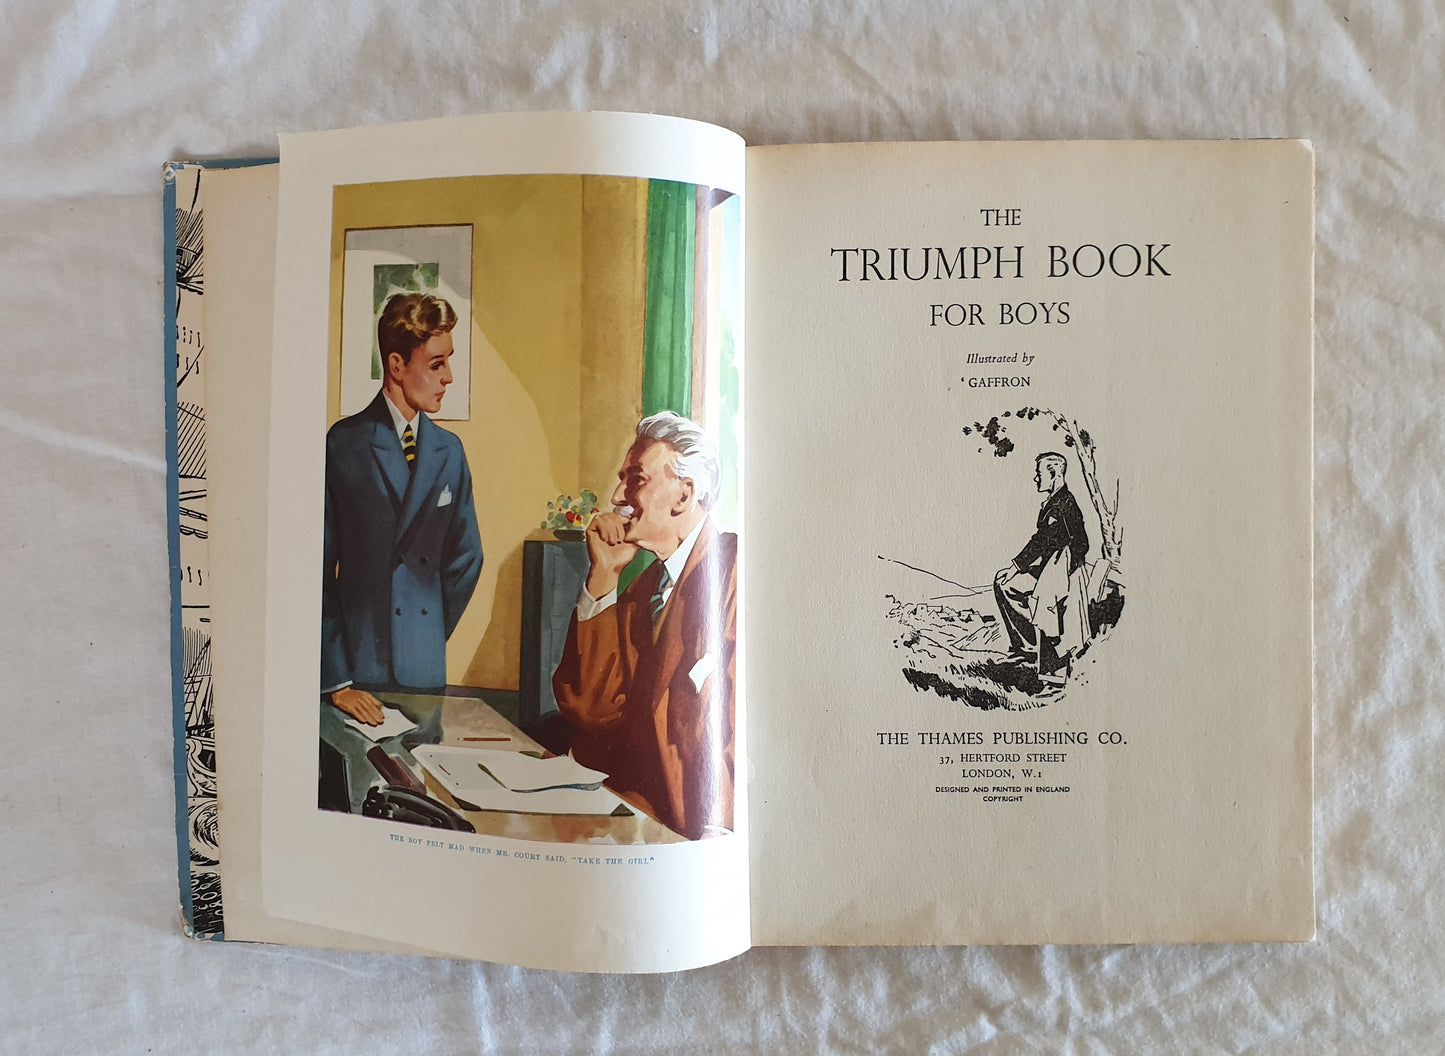 The Triumph Book for Boys illustrated by Gaffron